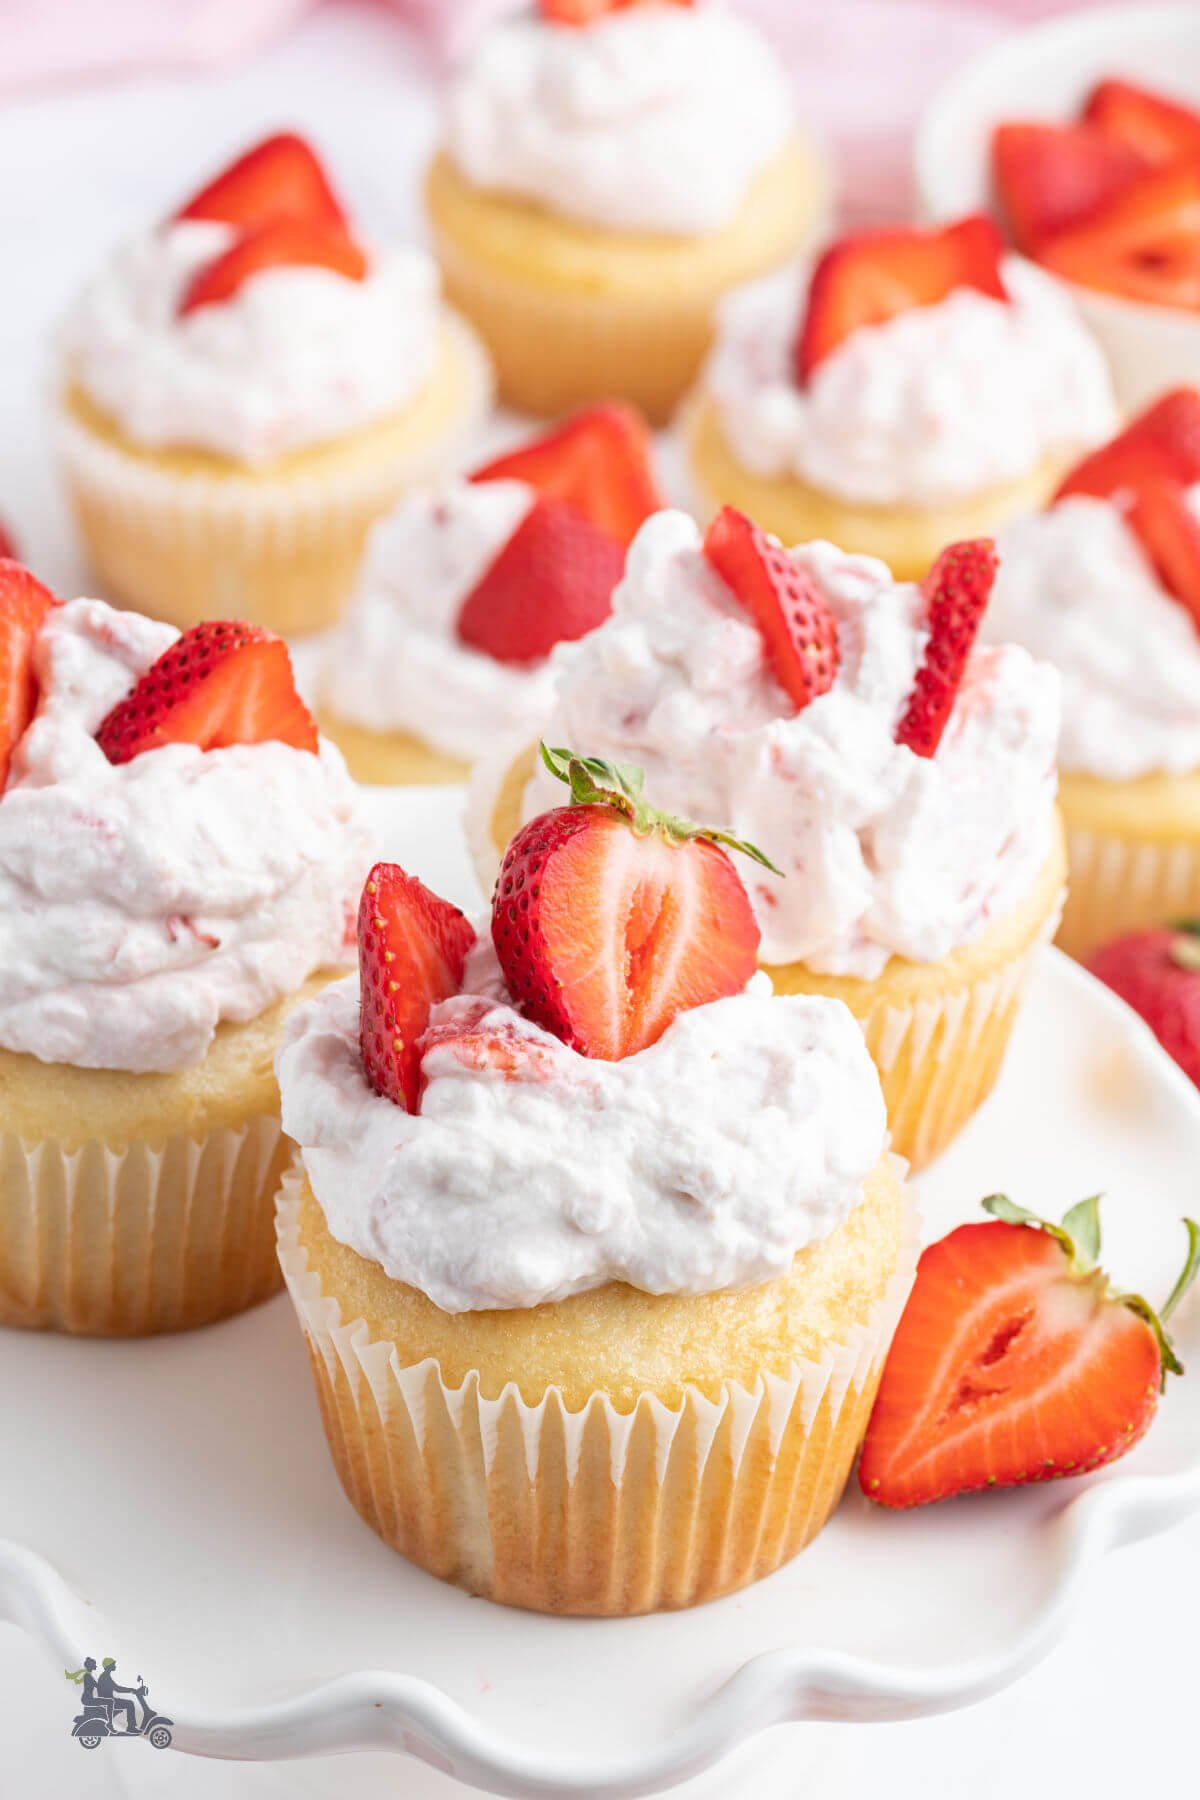 Strawberry Shortcake Cupcakes with sliced strawberries on the whipped topping and placed on a pedestal cake plate.